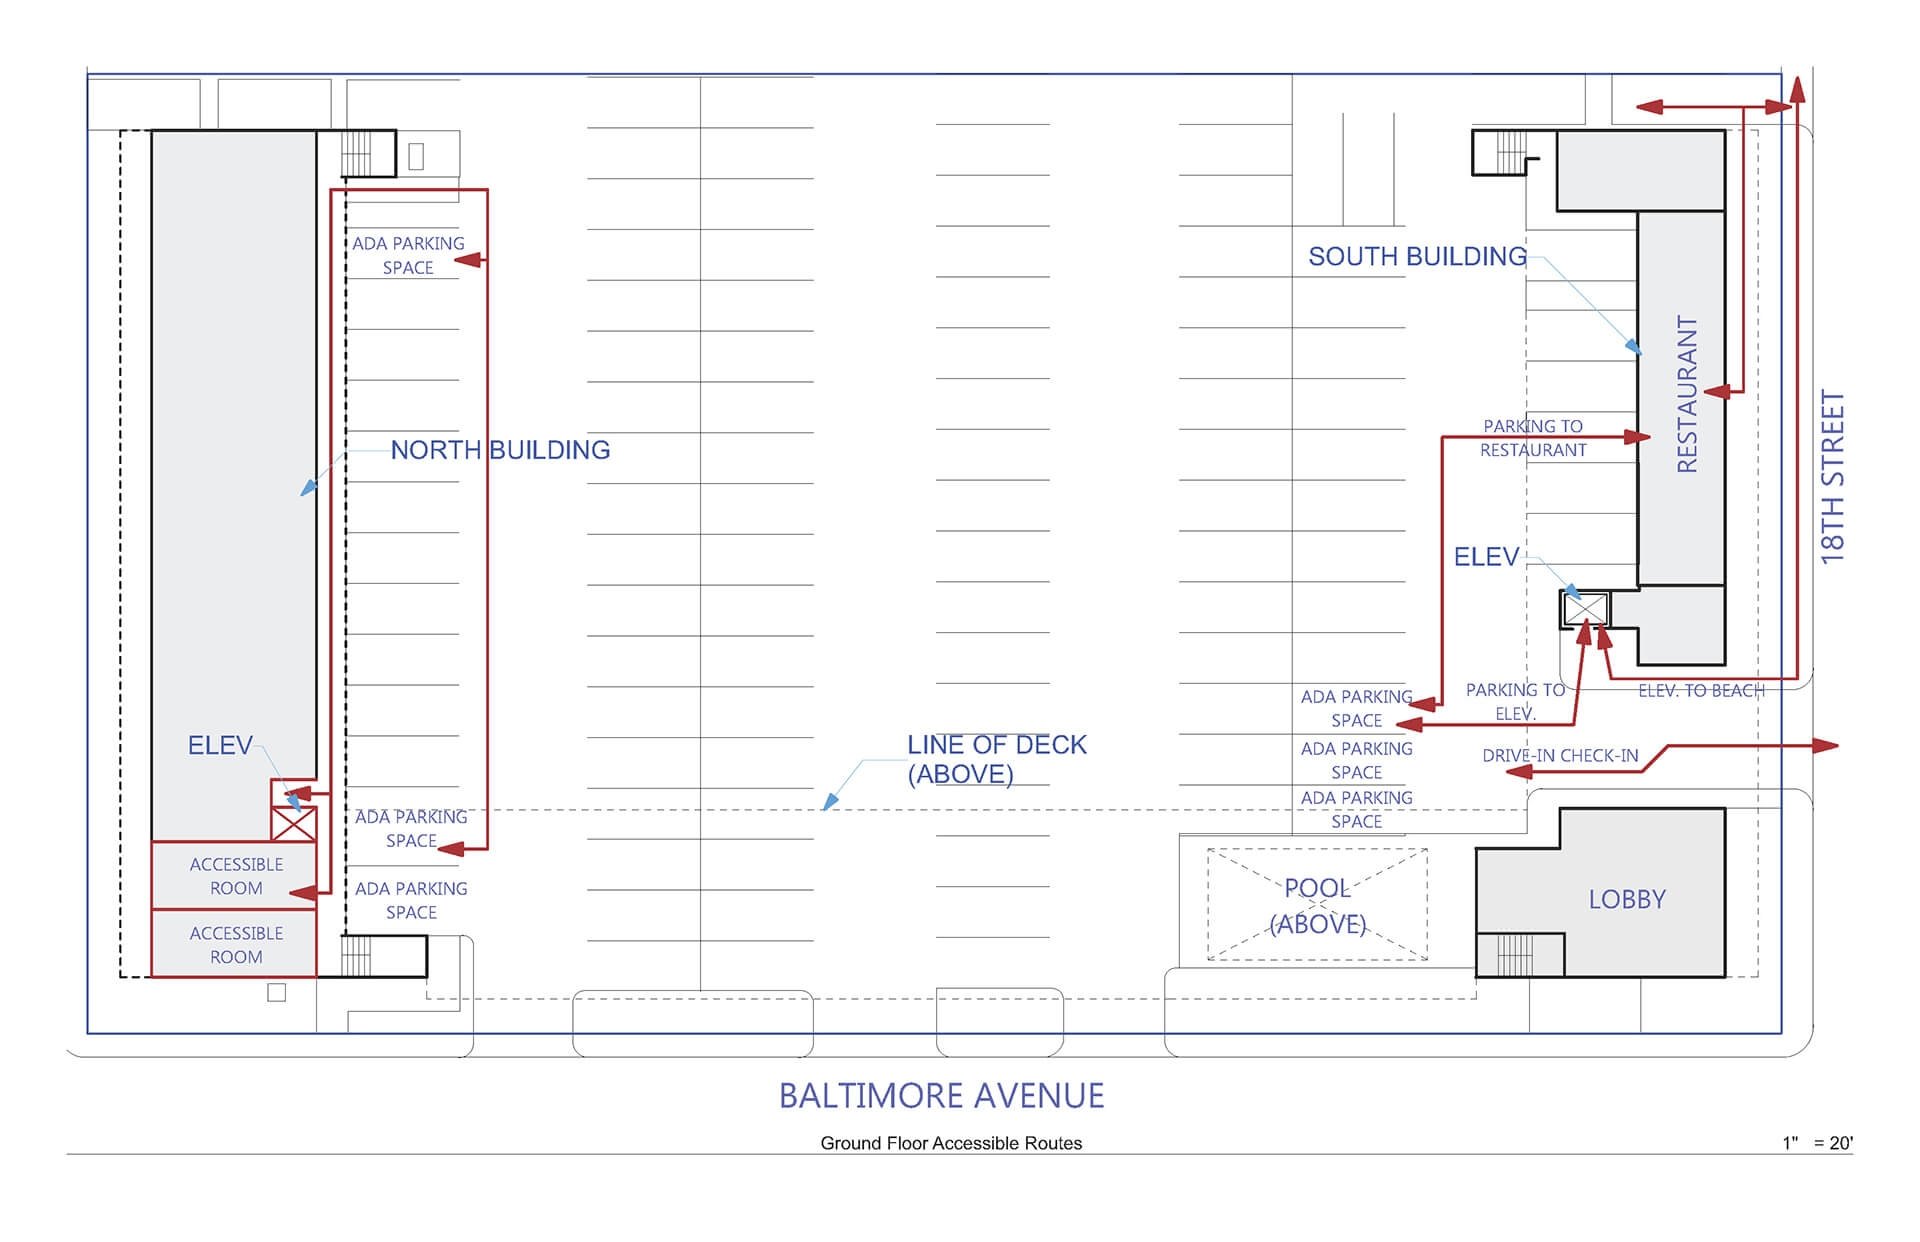 Image of the ground floor accessible routes